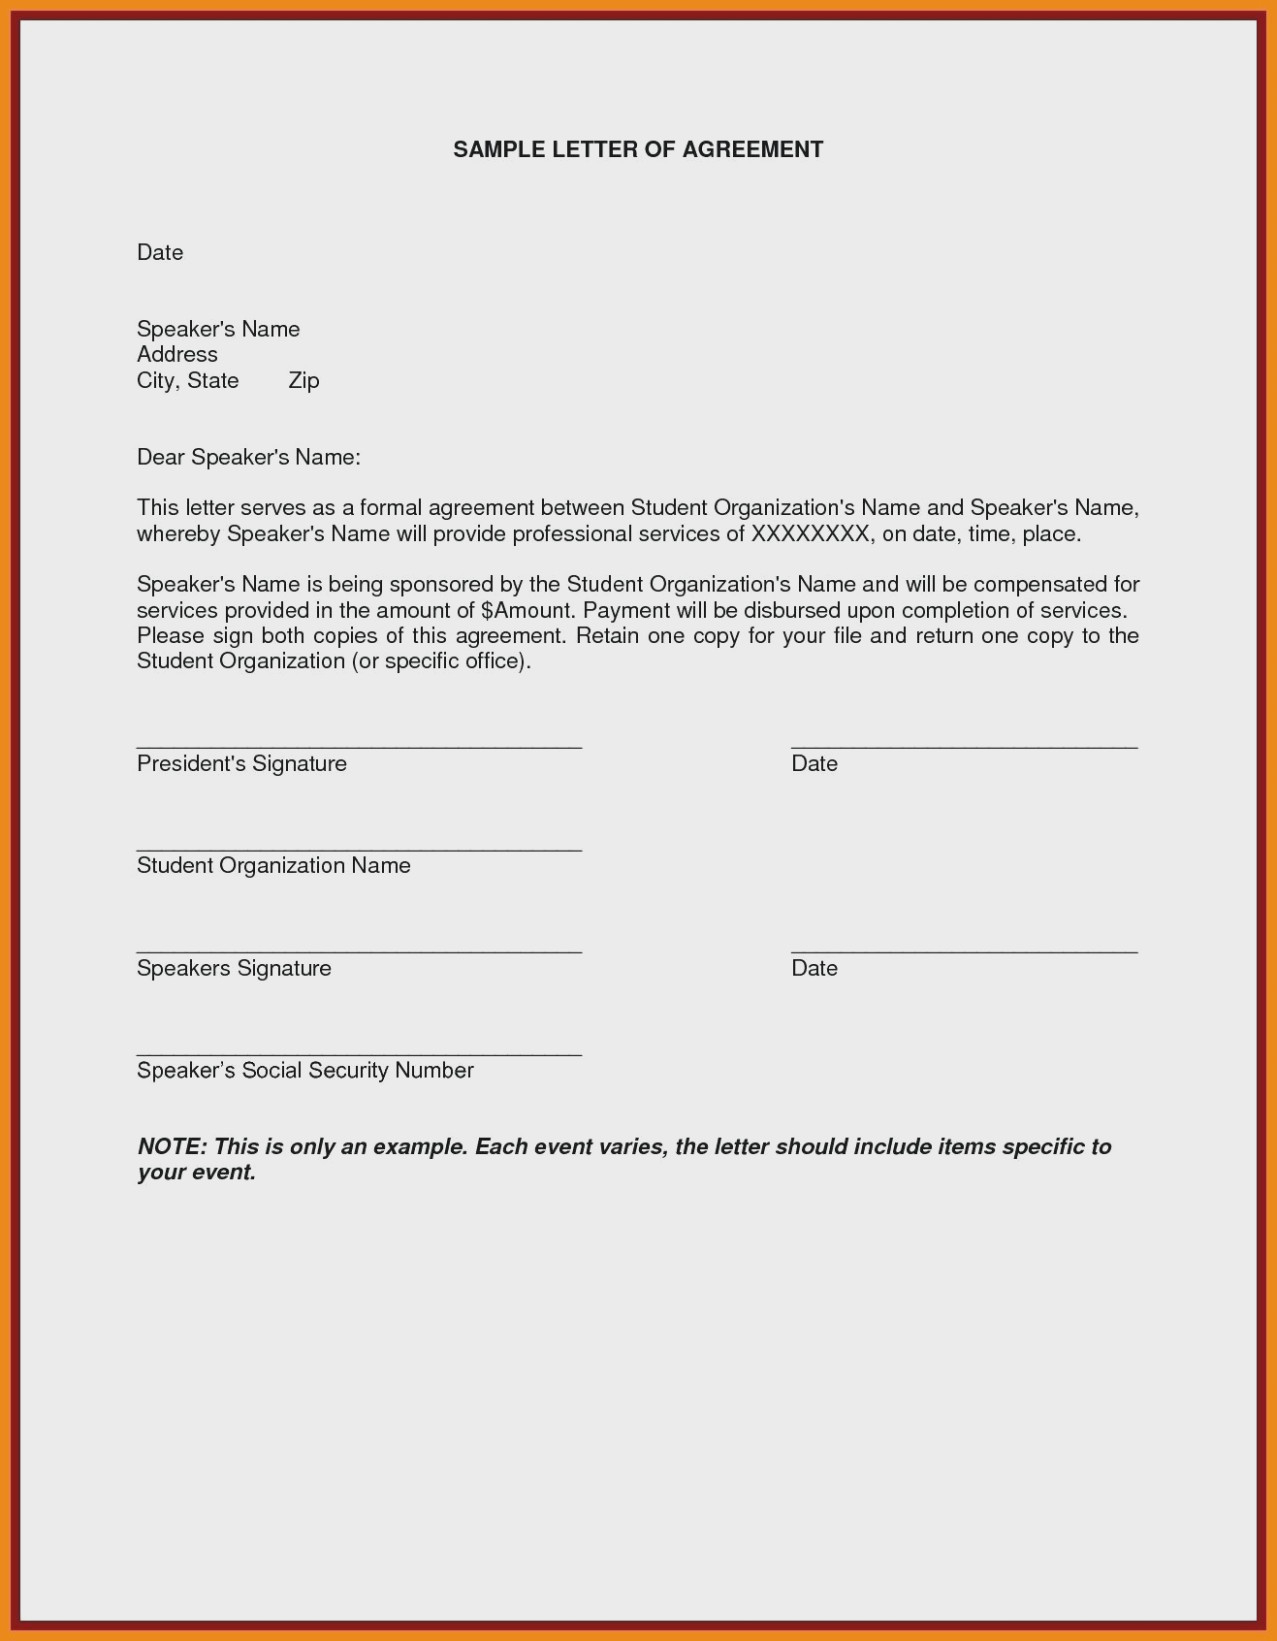 Loan Agreement Letter Template 10 Outrageous Ideas For Your Loan Receipt Invoice Form